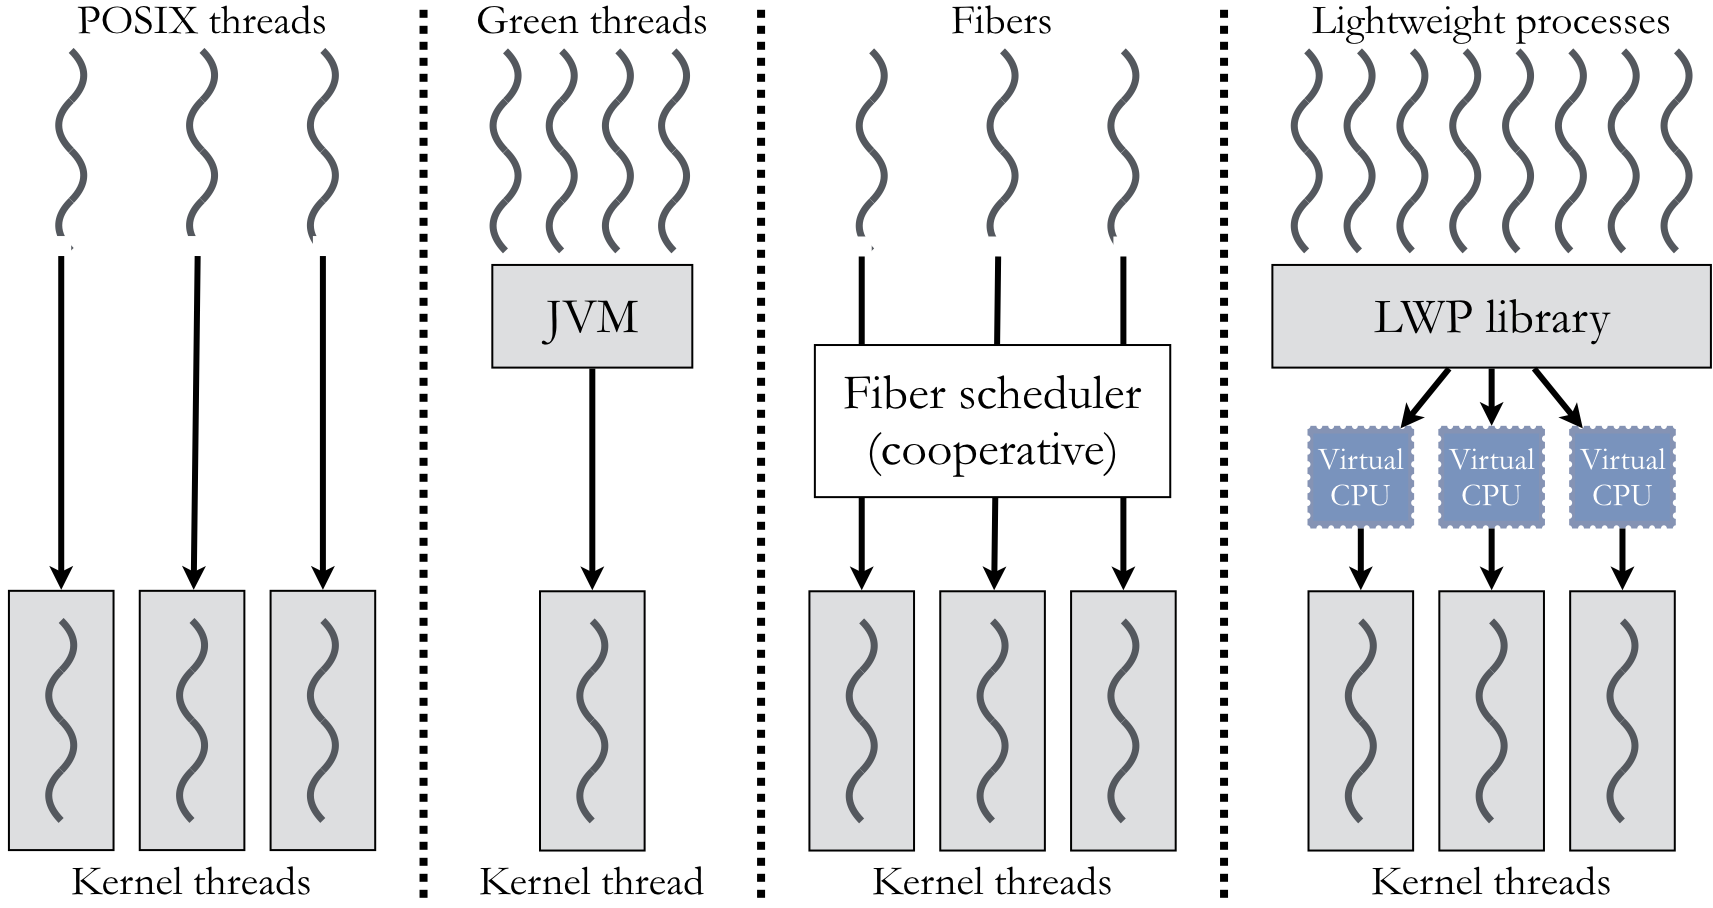 Mapping models for POSIX, Green threads, fibers, and lightweight processes